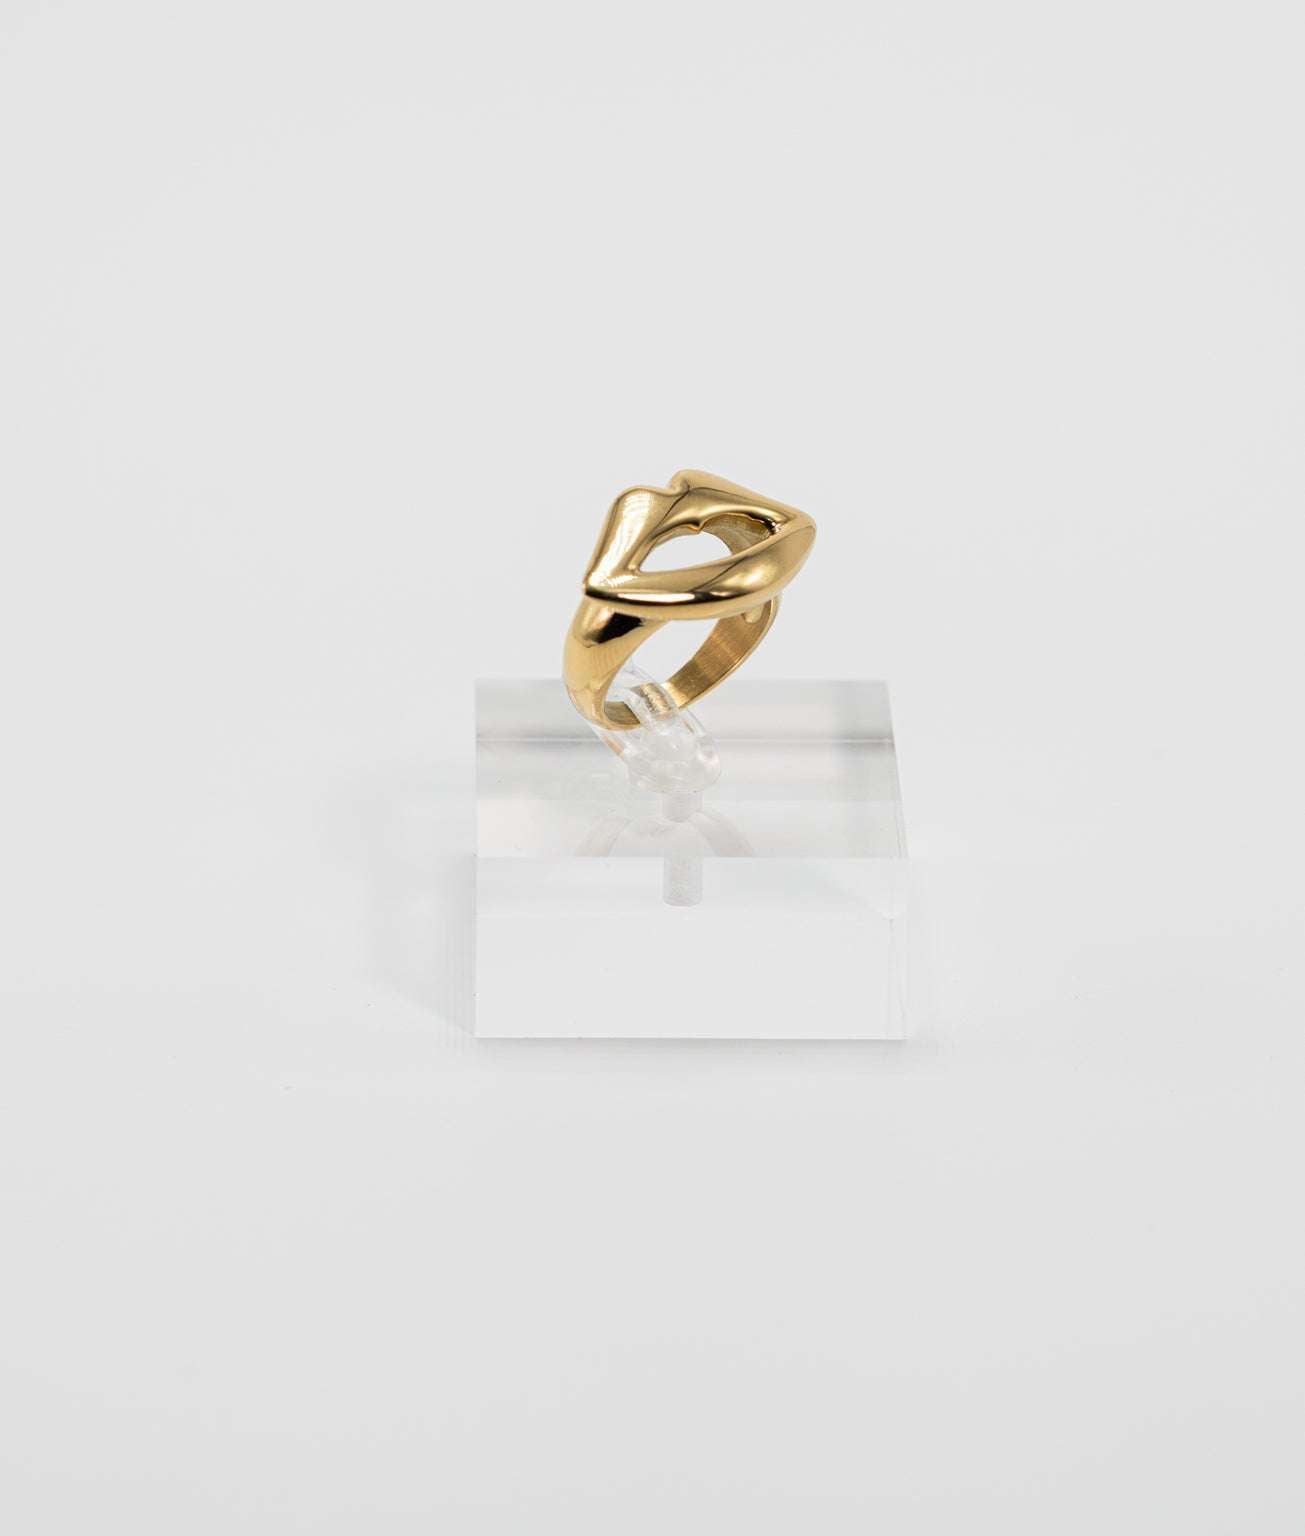 Lip Shape Ring | Show your love with a kiss ring